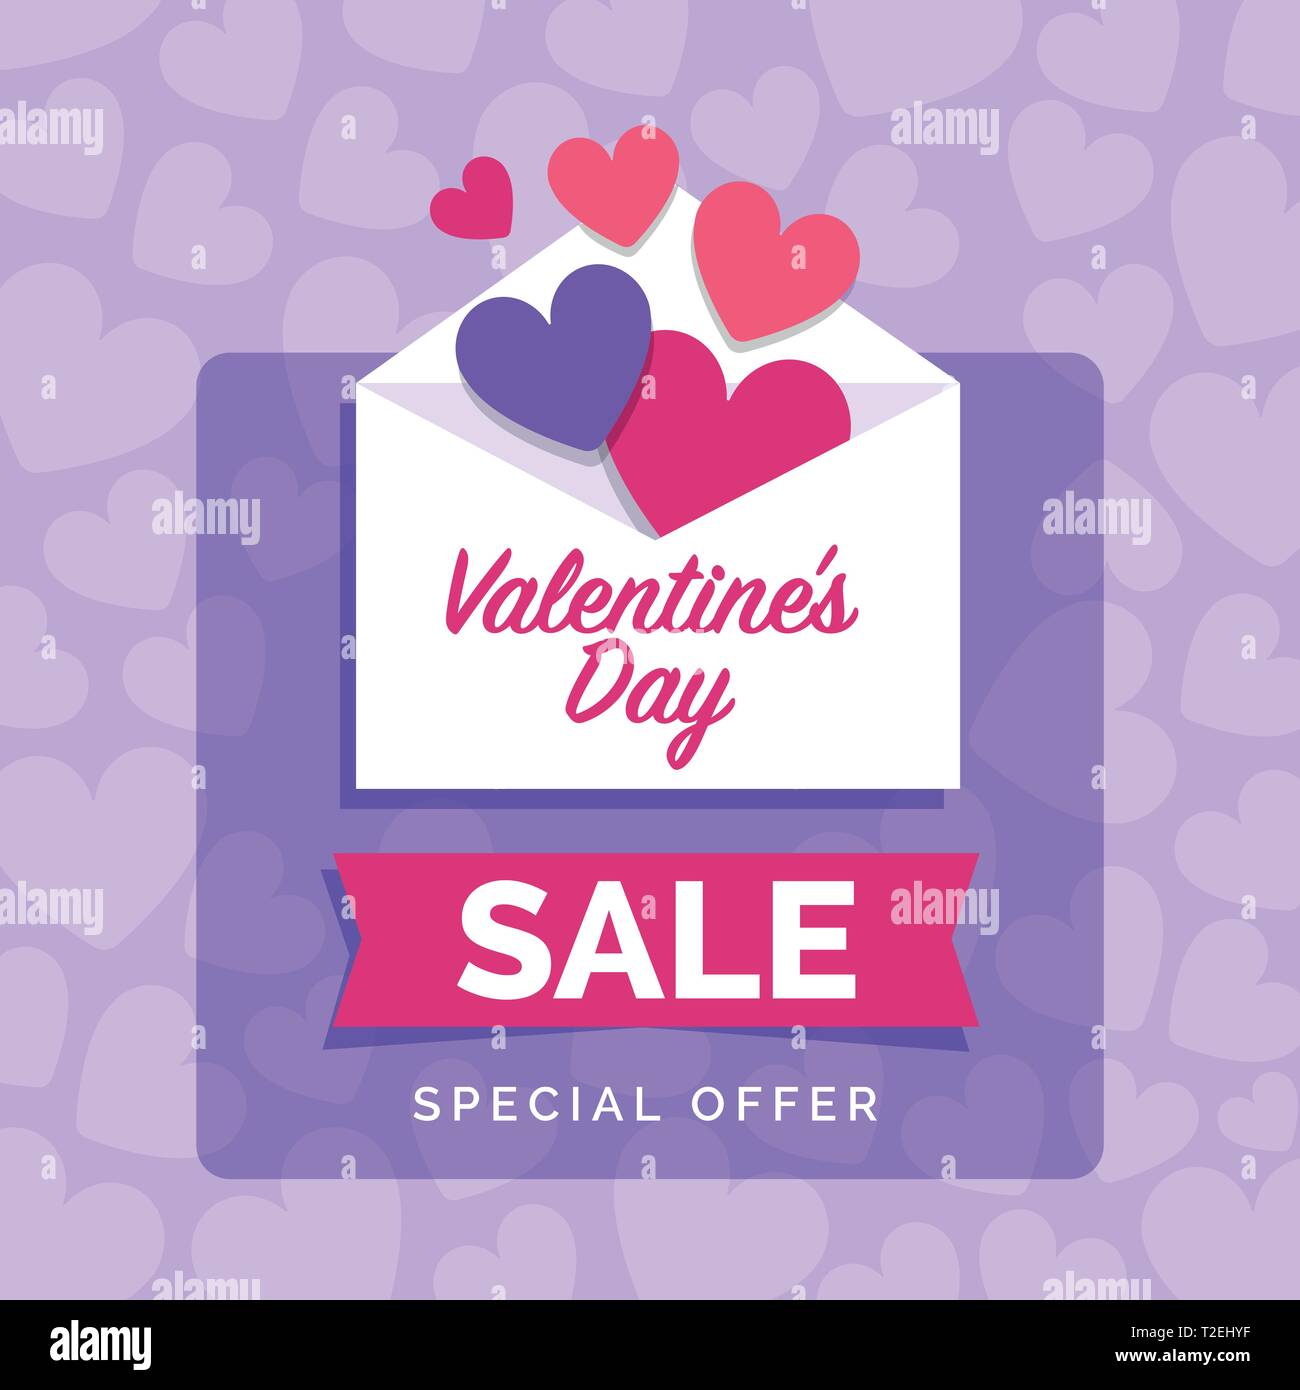 Happy Valentine's day promotional sale design with open envelope and hearts Stock Vector